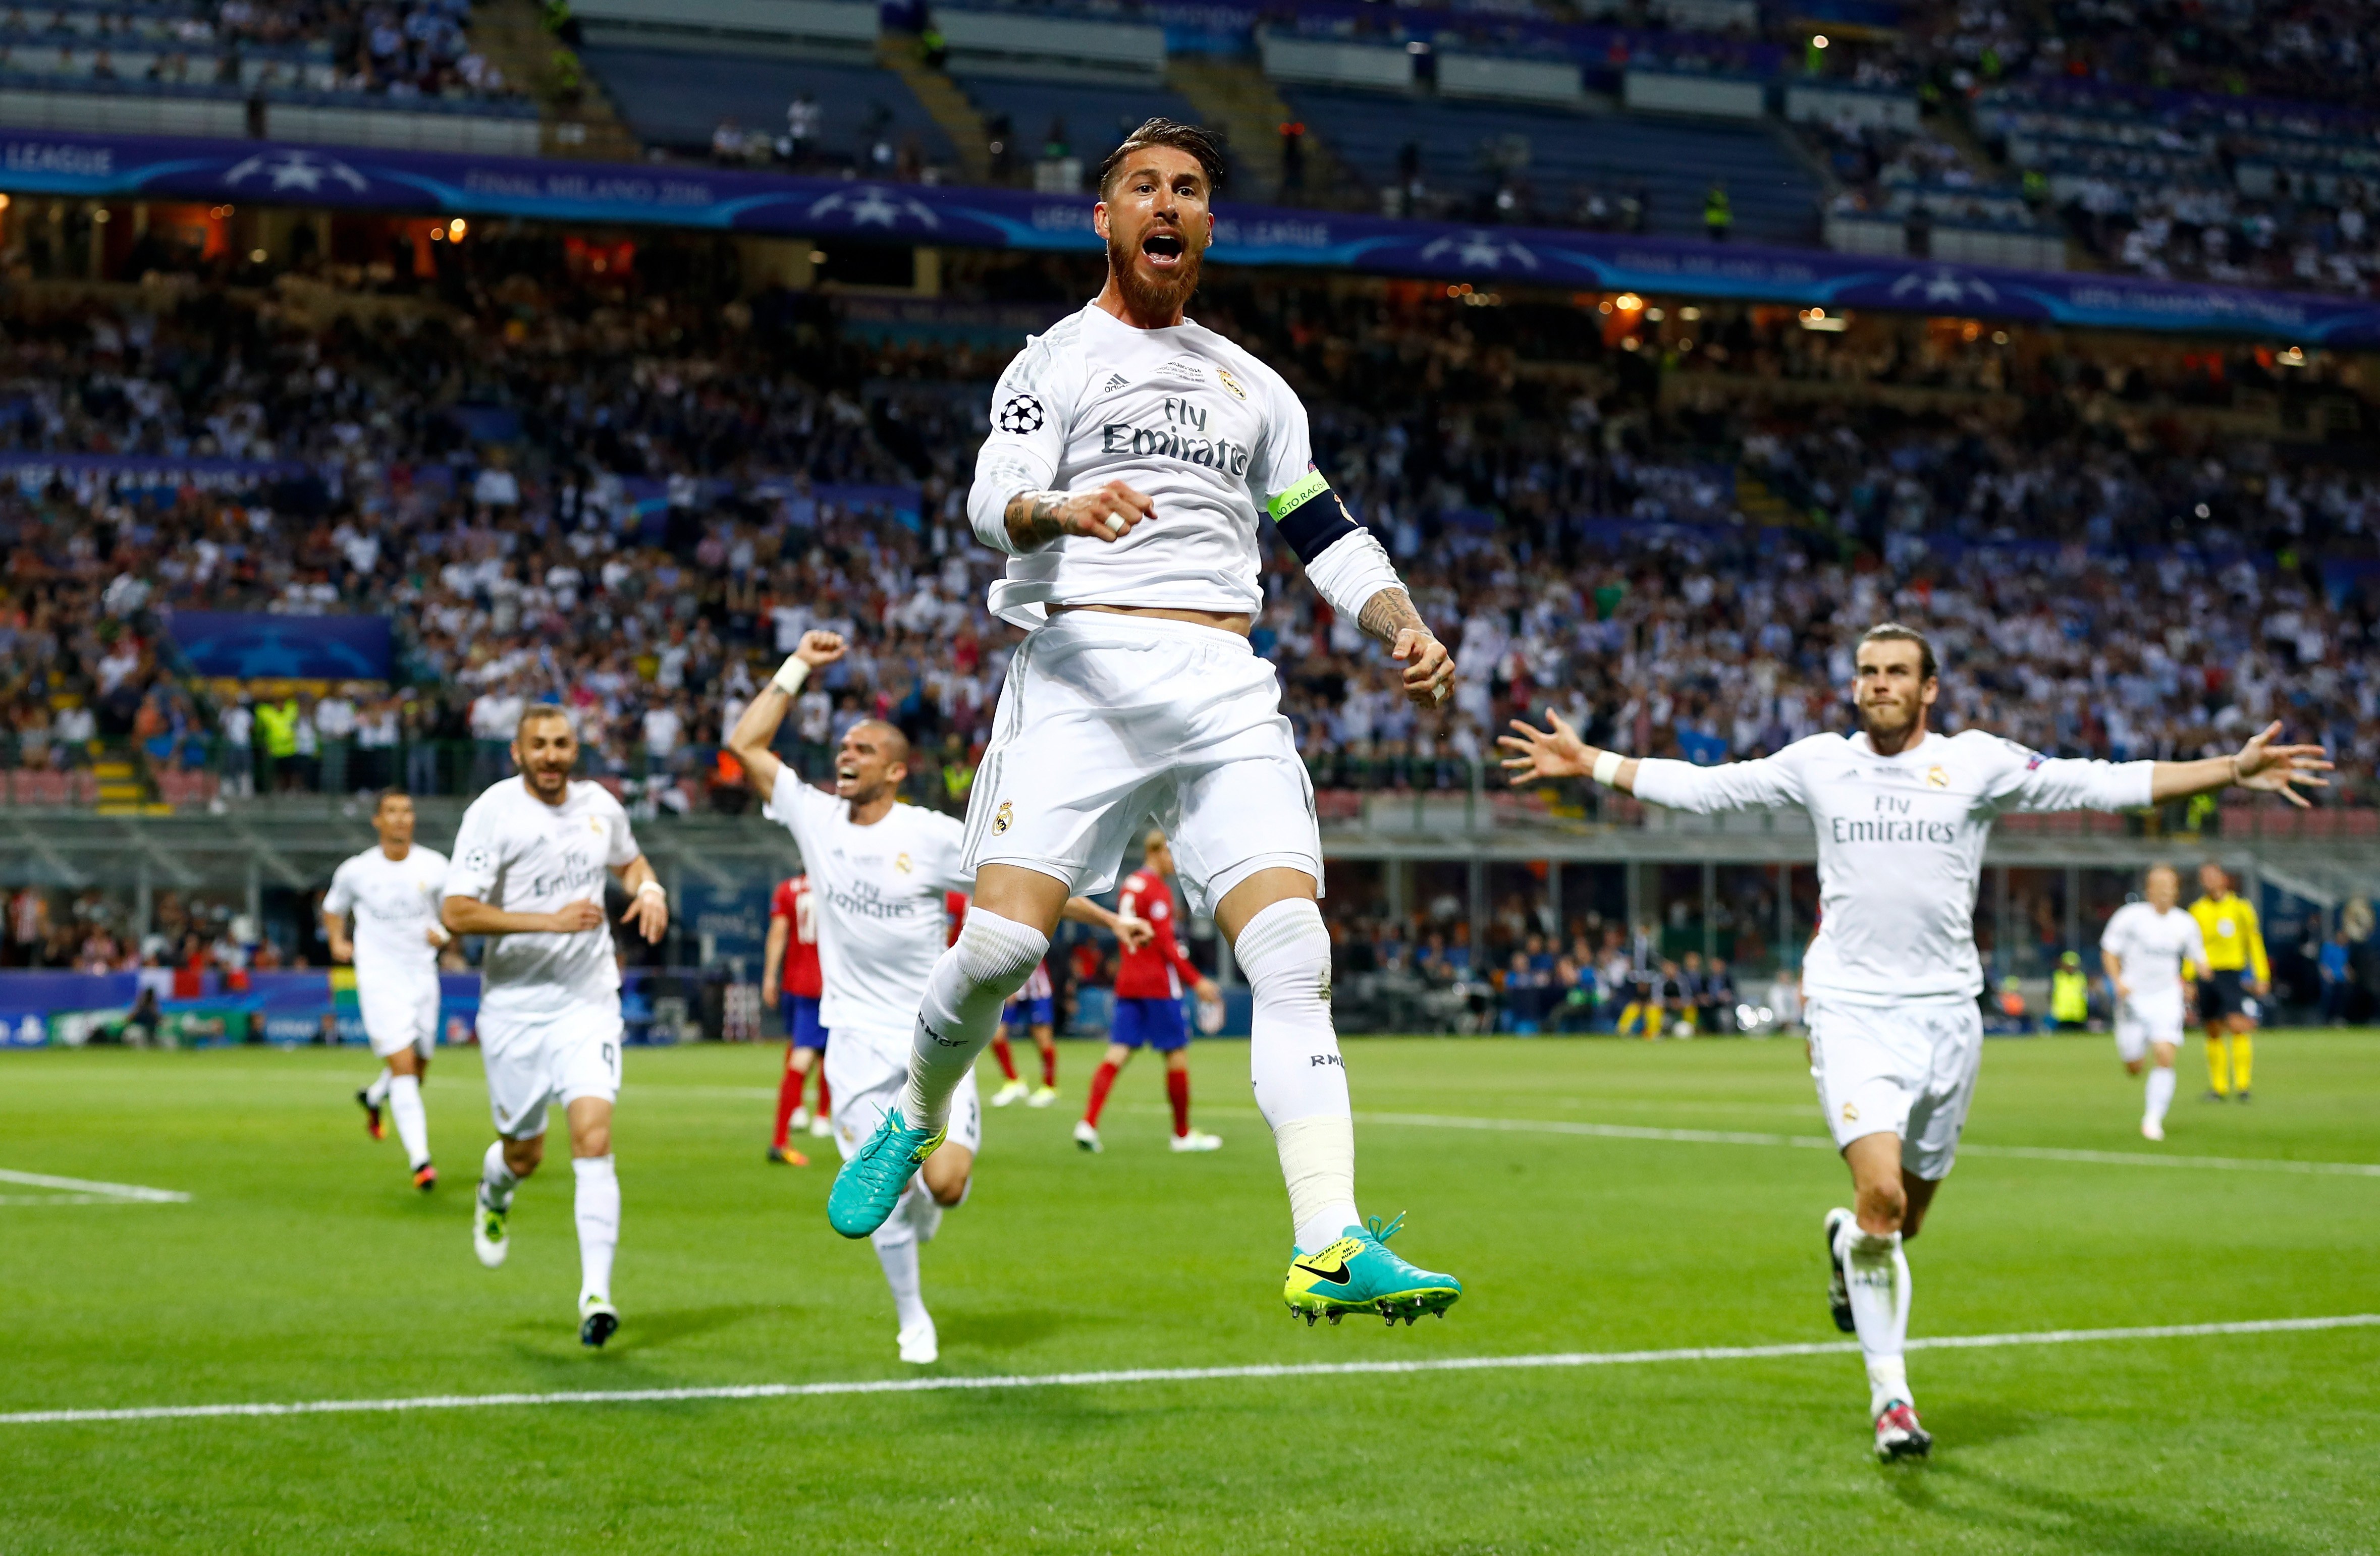 Real Madrid edge Atletico in penalties to lift 11th Champions League title